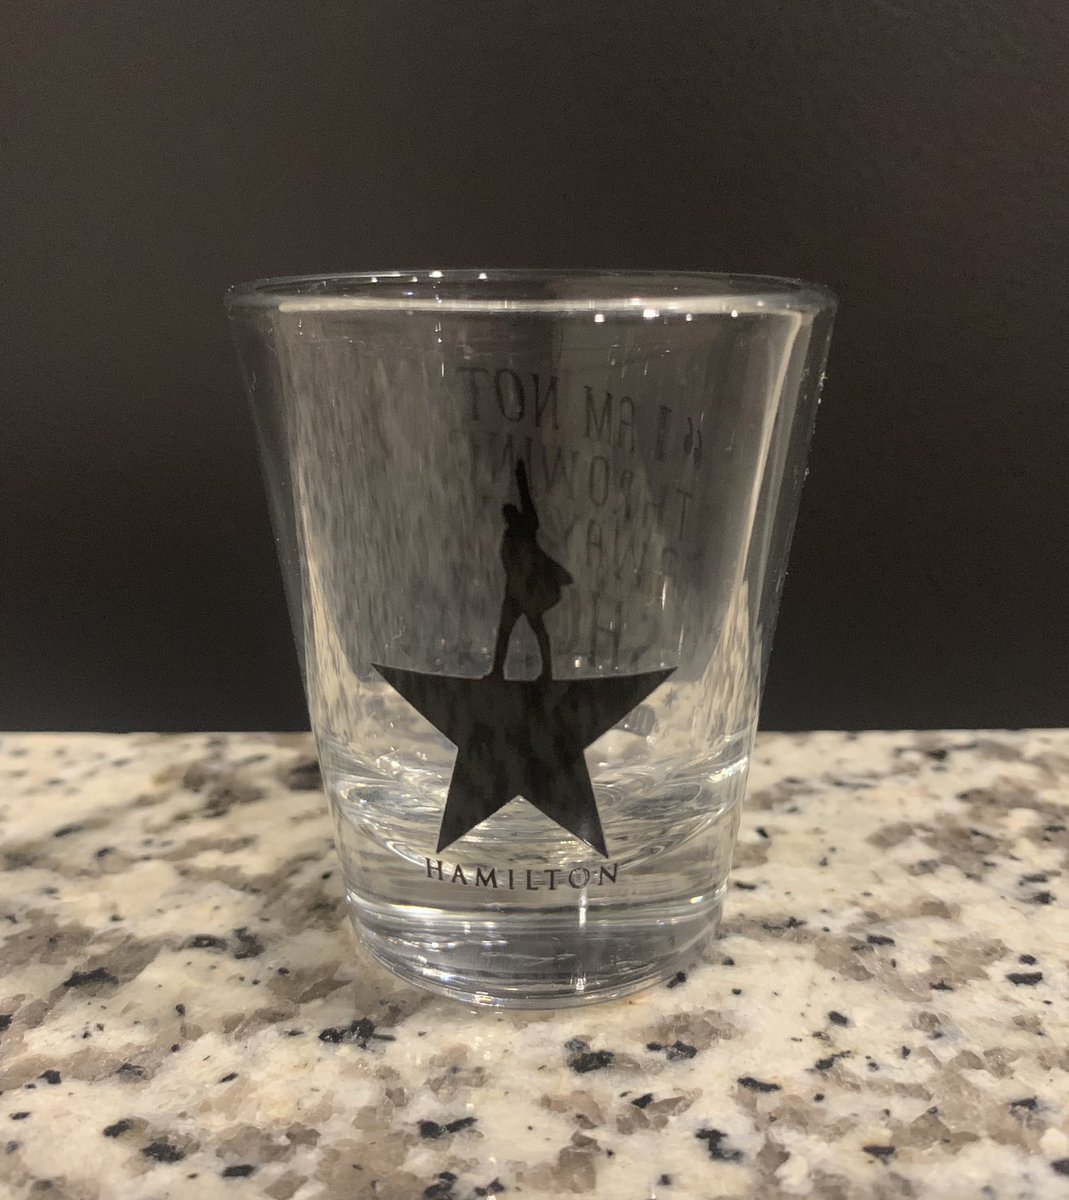 Day 7: In lieu of travel I’d like to do a tour of past trips via shot glasses. This is from when I took my wife to Hamilton in Chicago for her birthday. We’re watching it tonight with our 13 yr old. “I am not throwin’ away my shot(glass)”  